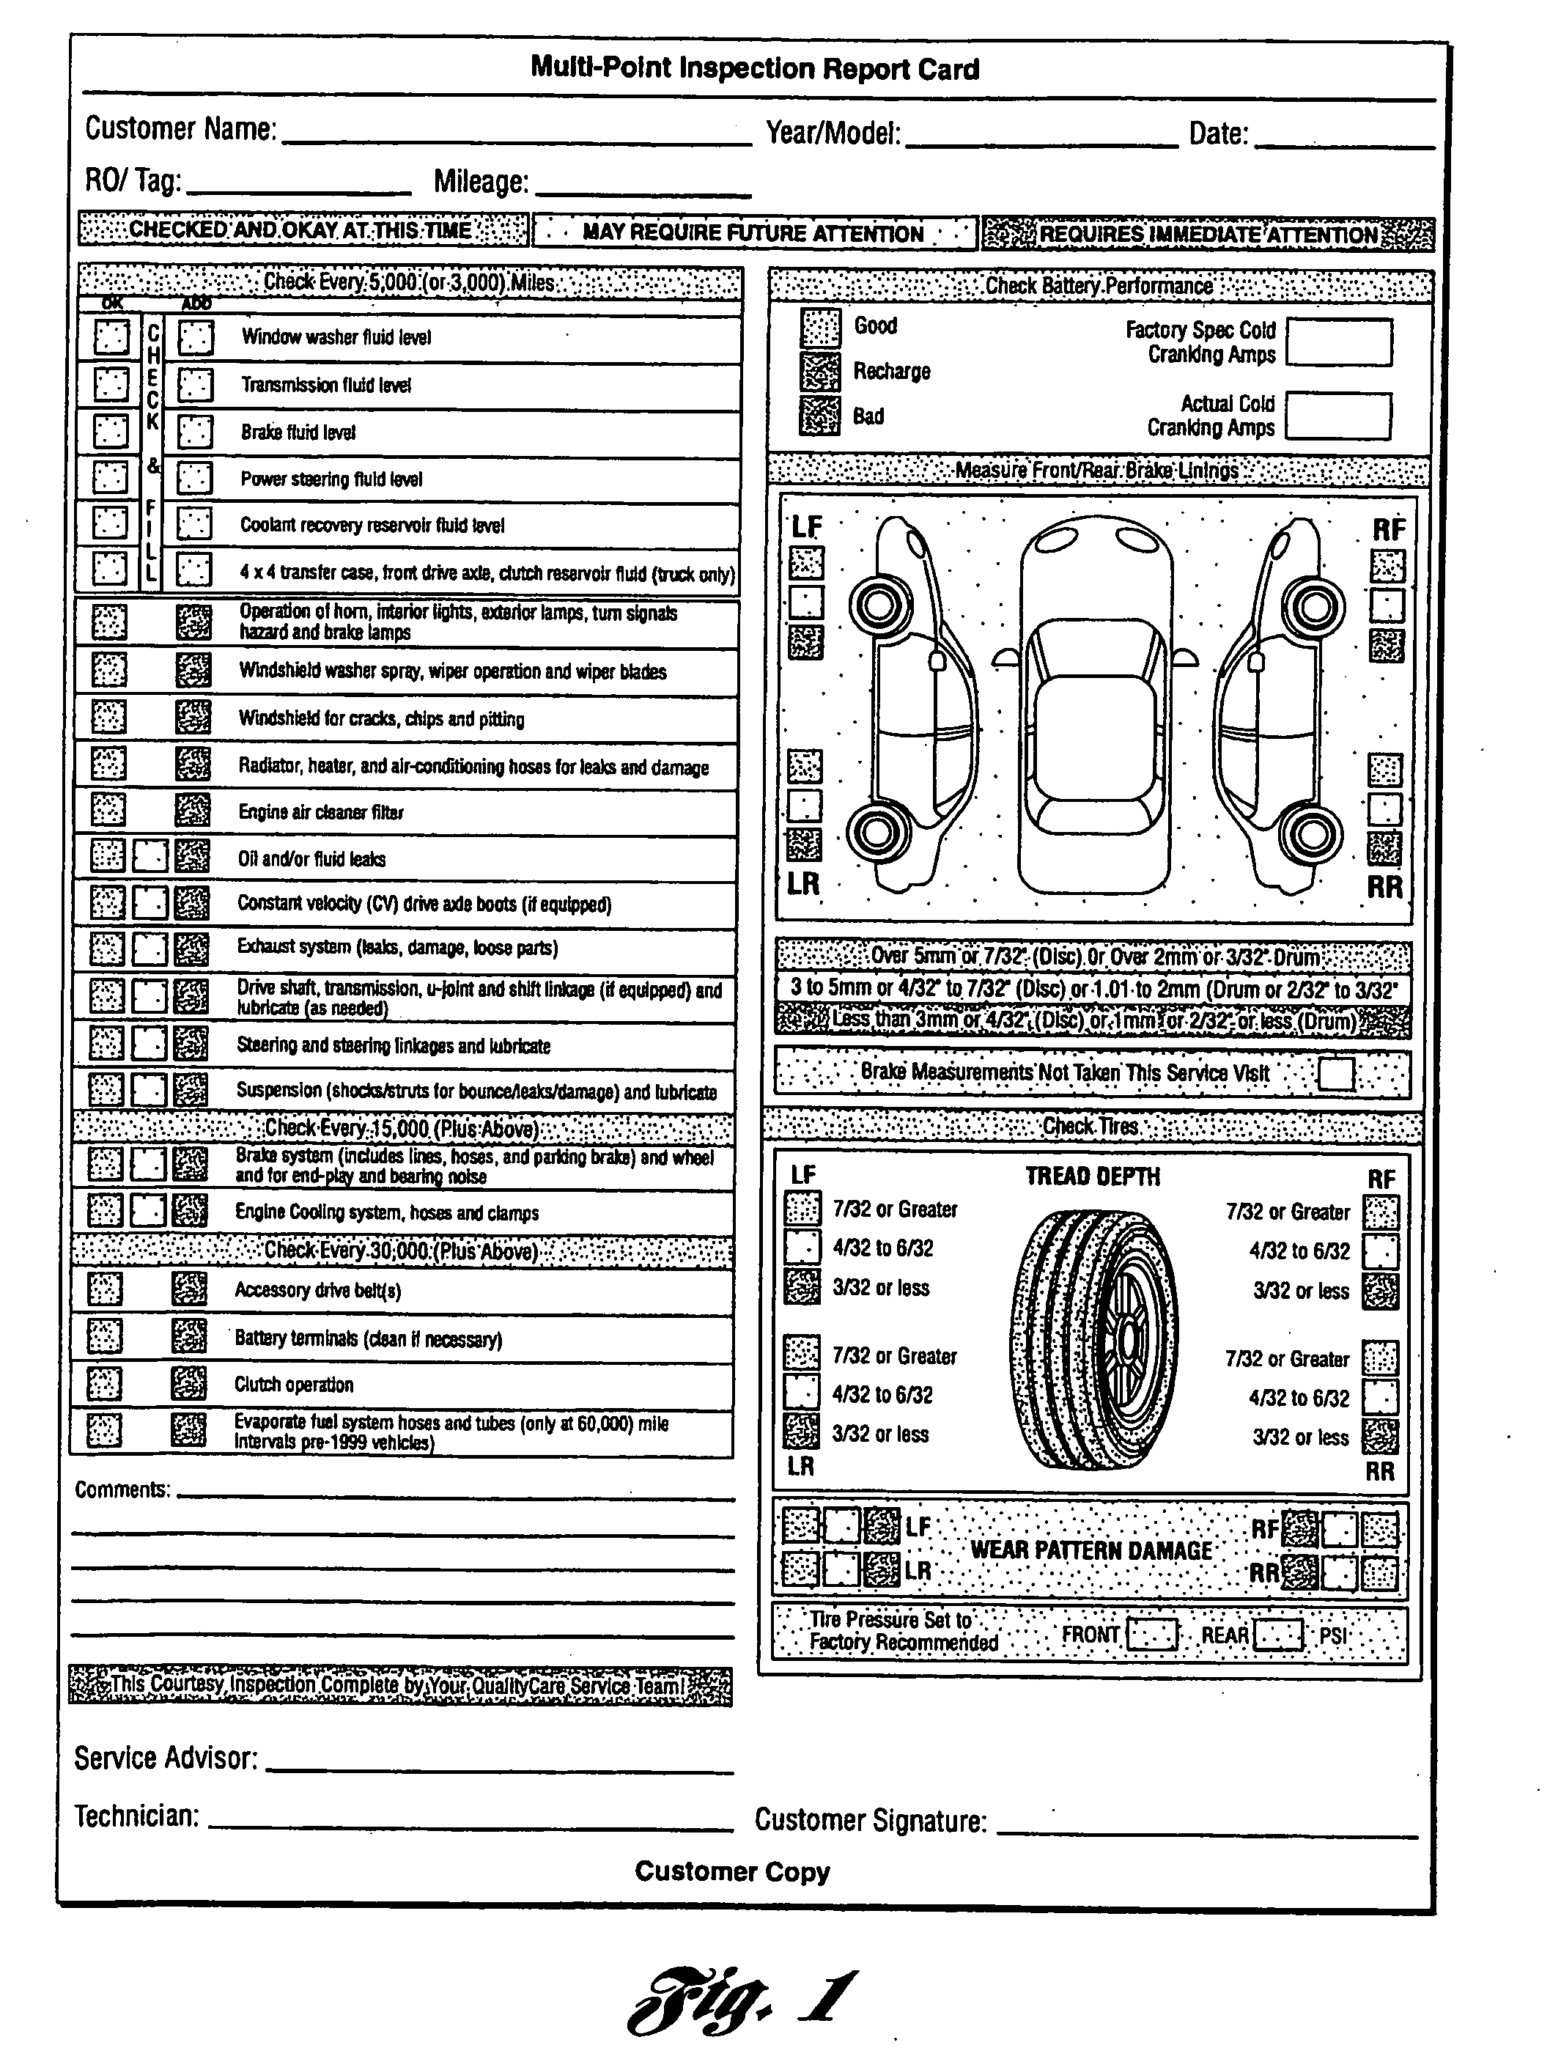 multi-point-inspection-report-card-as-recommendedford-throughout-truck